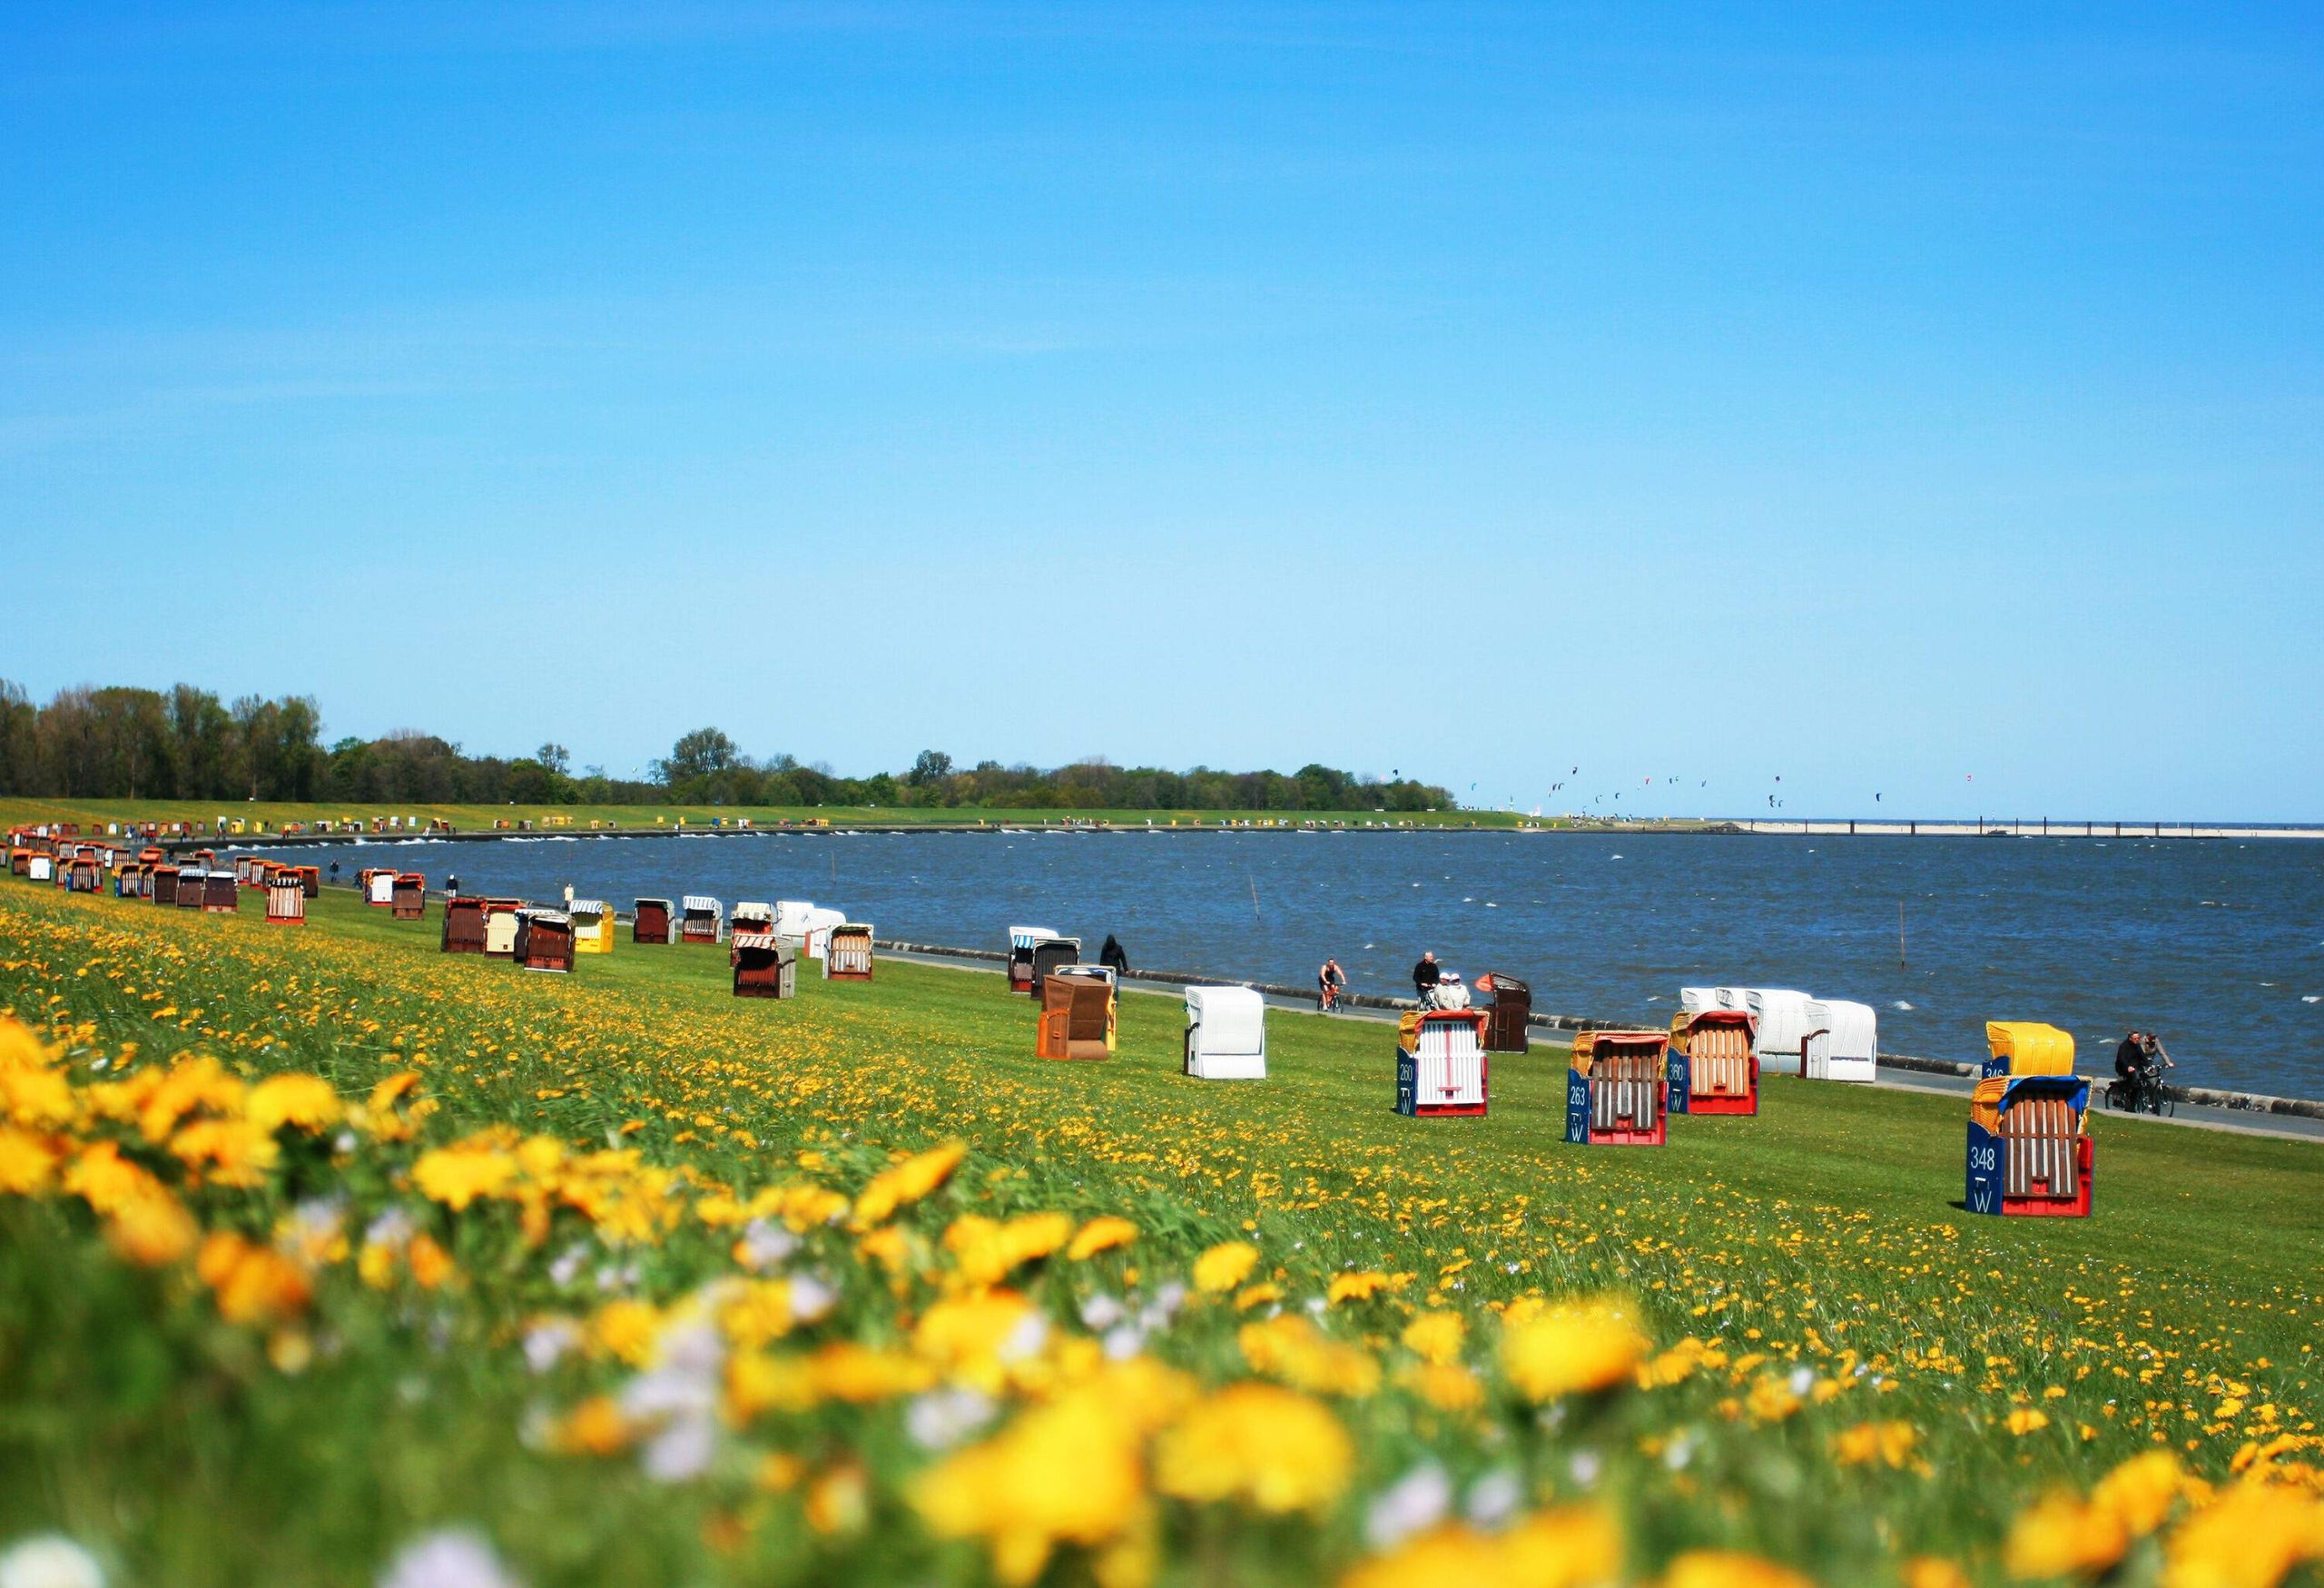 Colourful beach chairs scattered across lush meadows with yellow flowers by the sea.